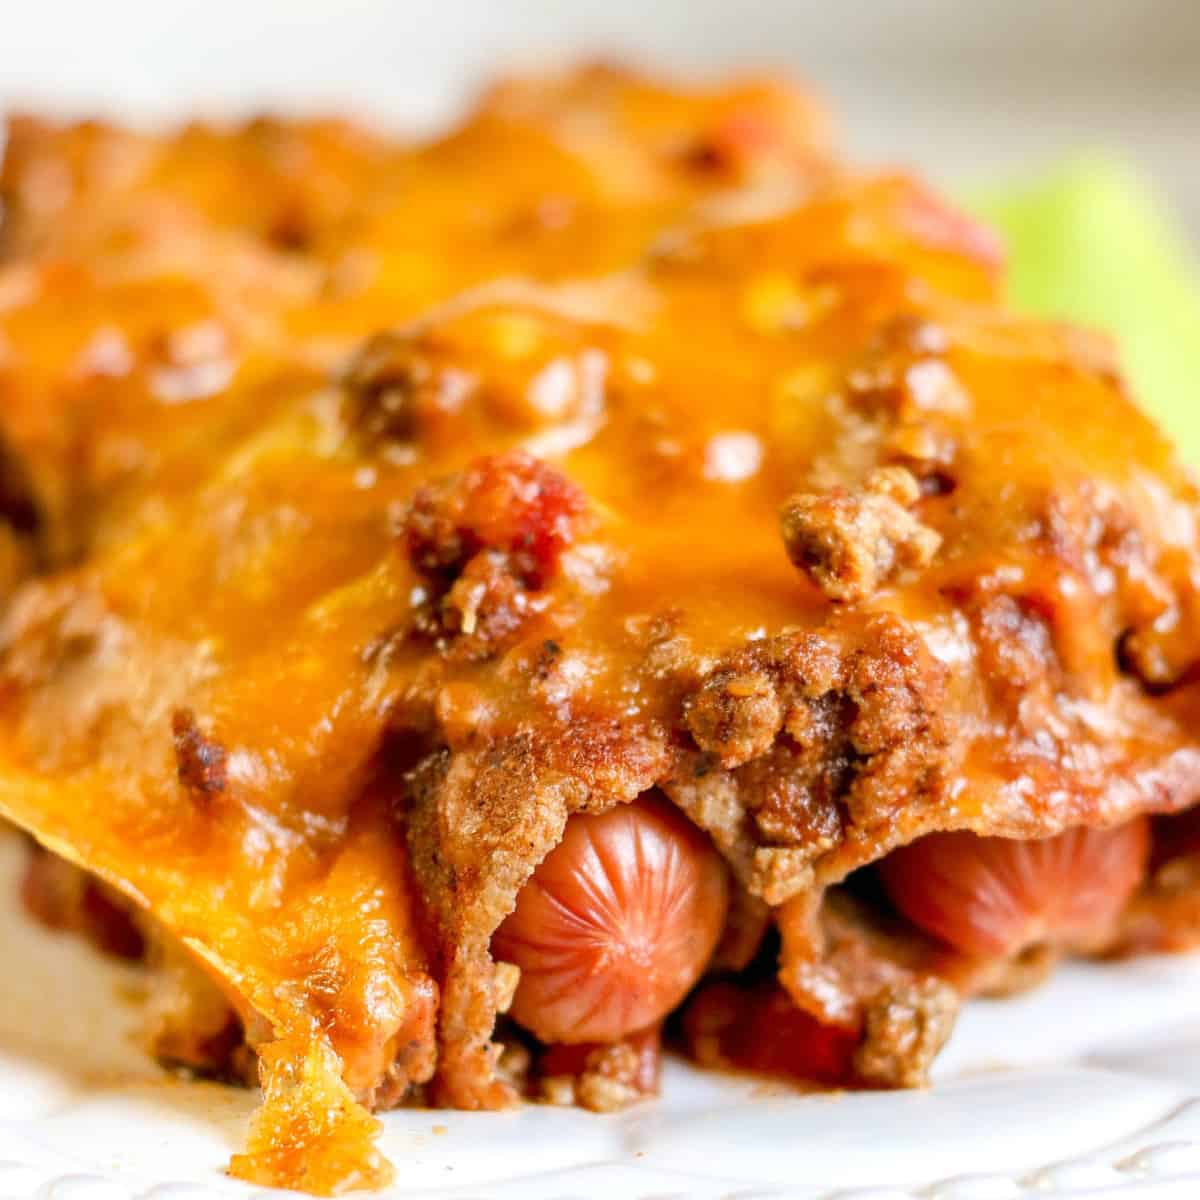 a serving of keto chili dog casserole on a plate.